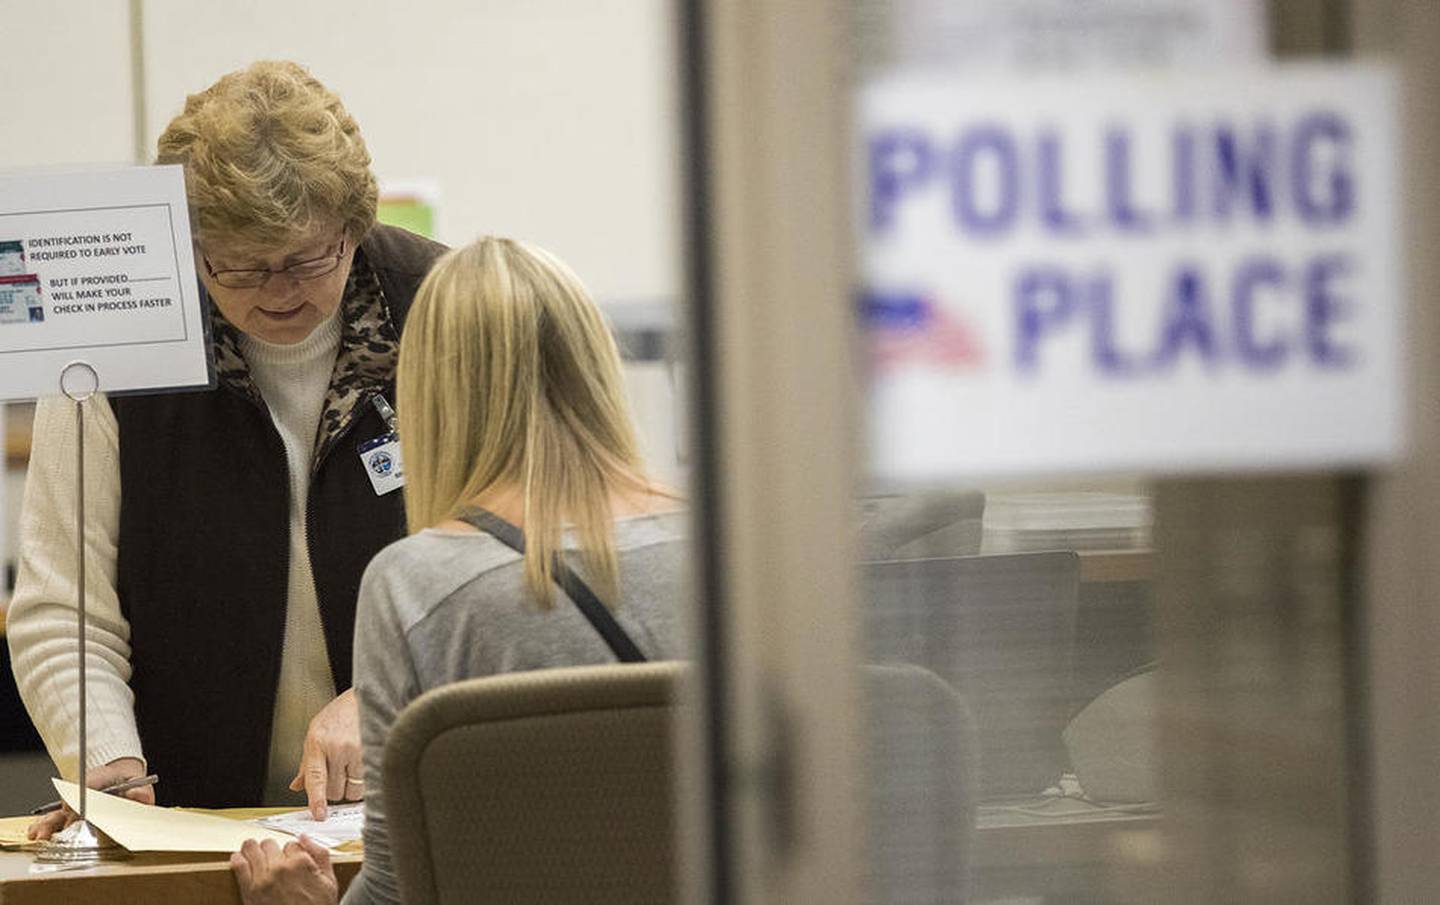 Election judge Sharon Holmes helps a voter Thursday at the DeKalb County Legislative Center in Sycamore.